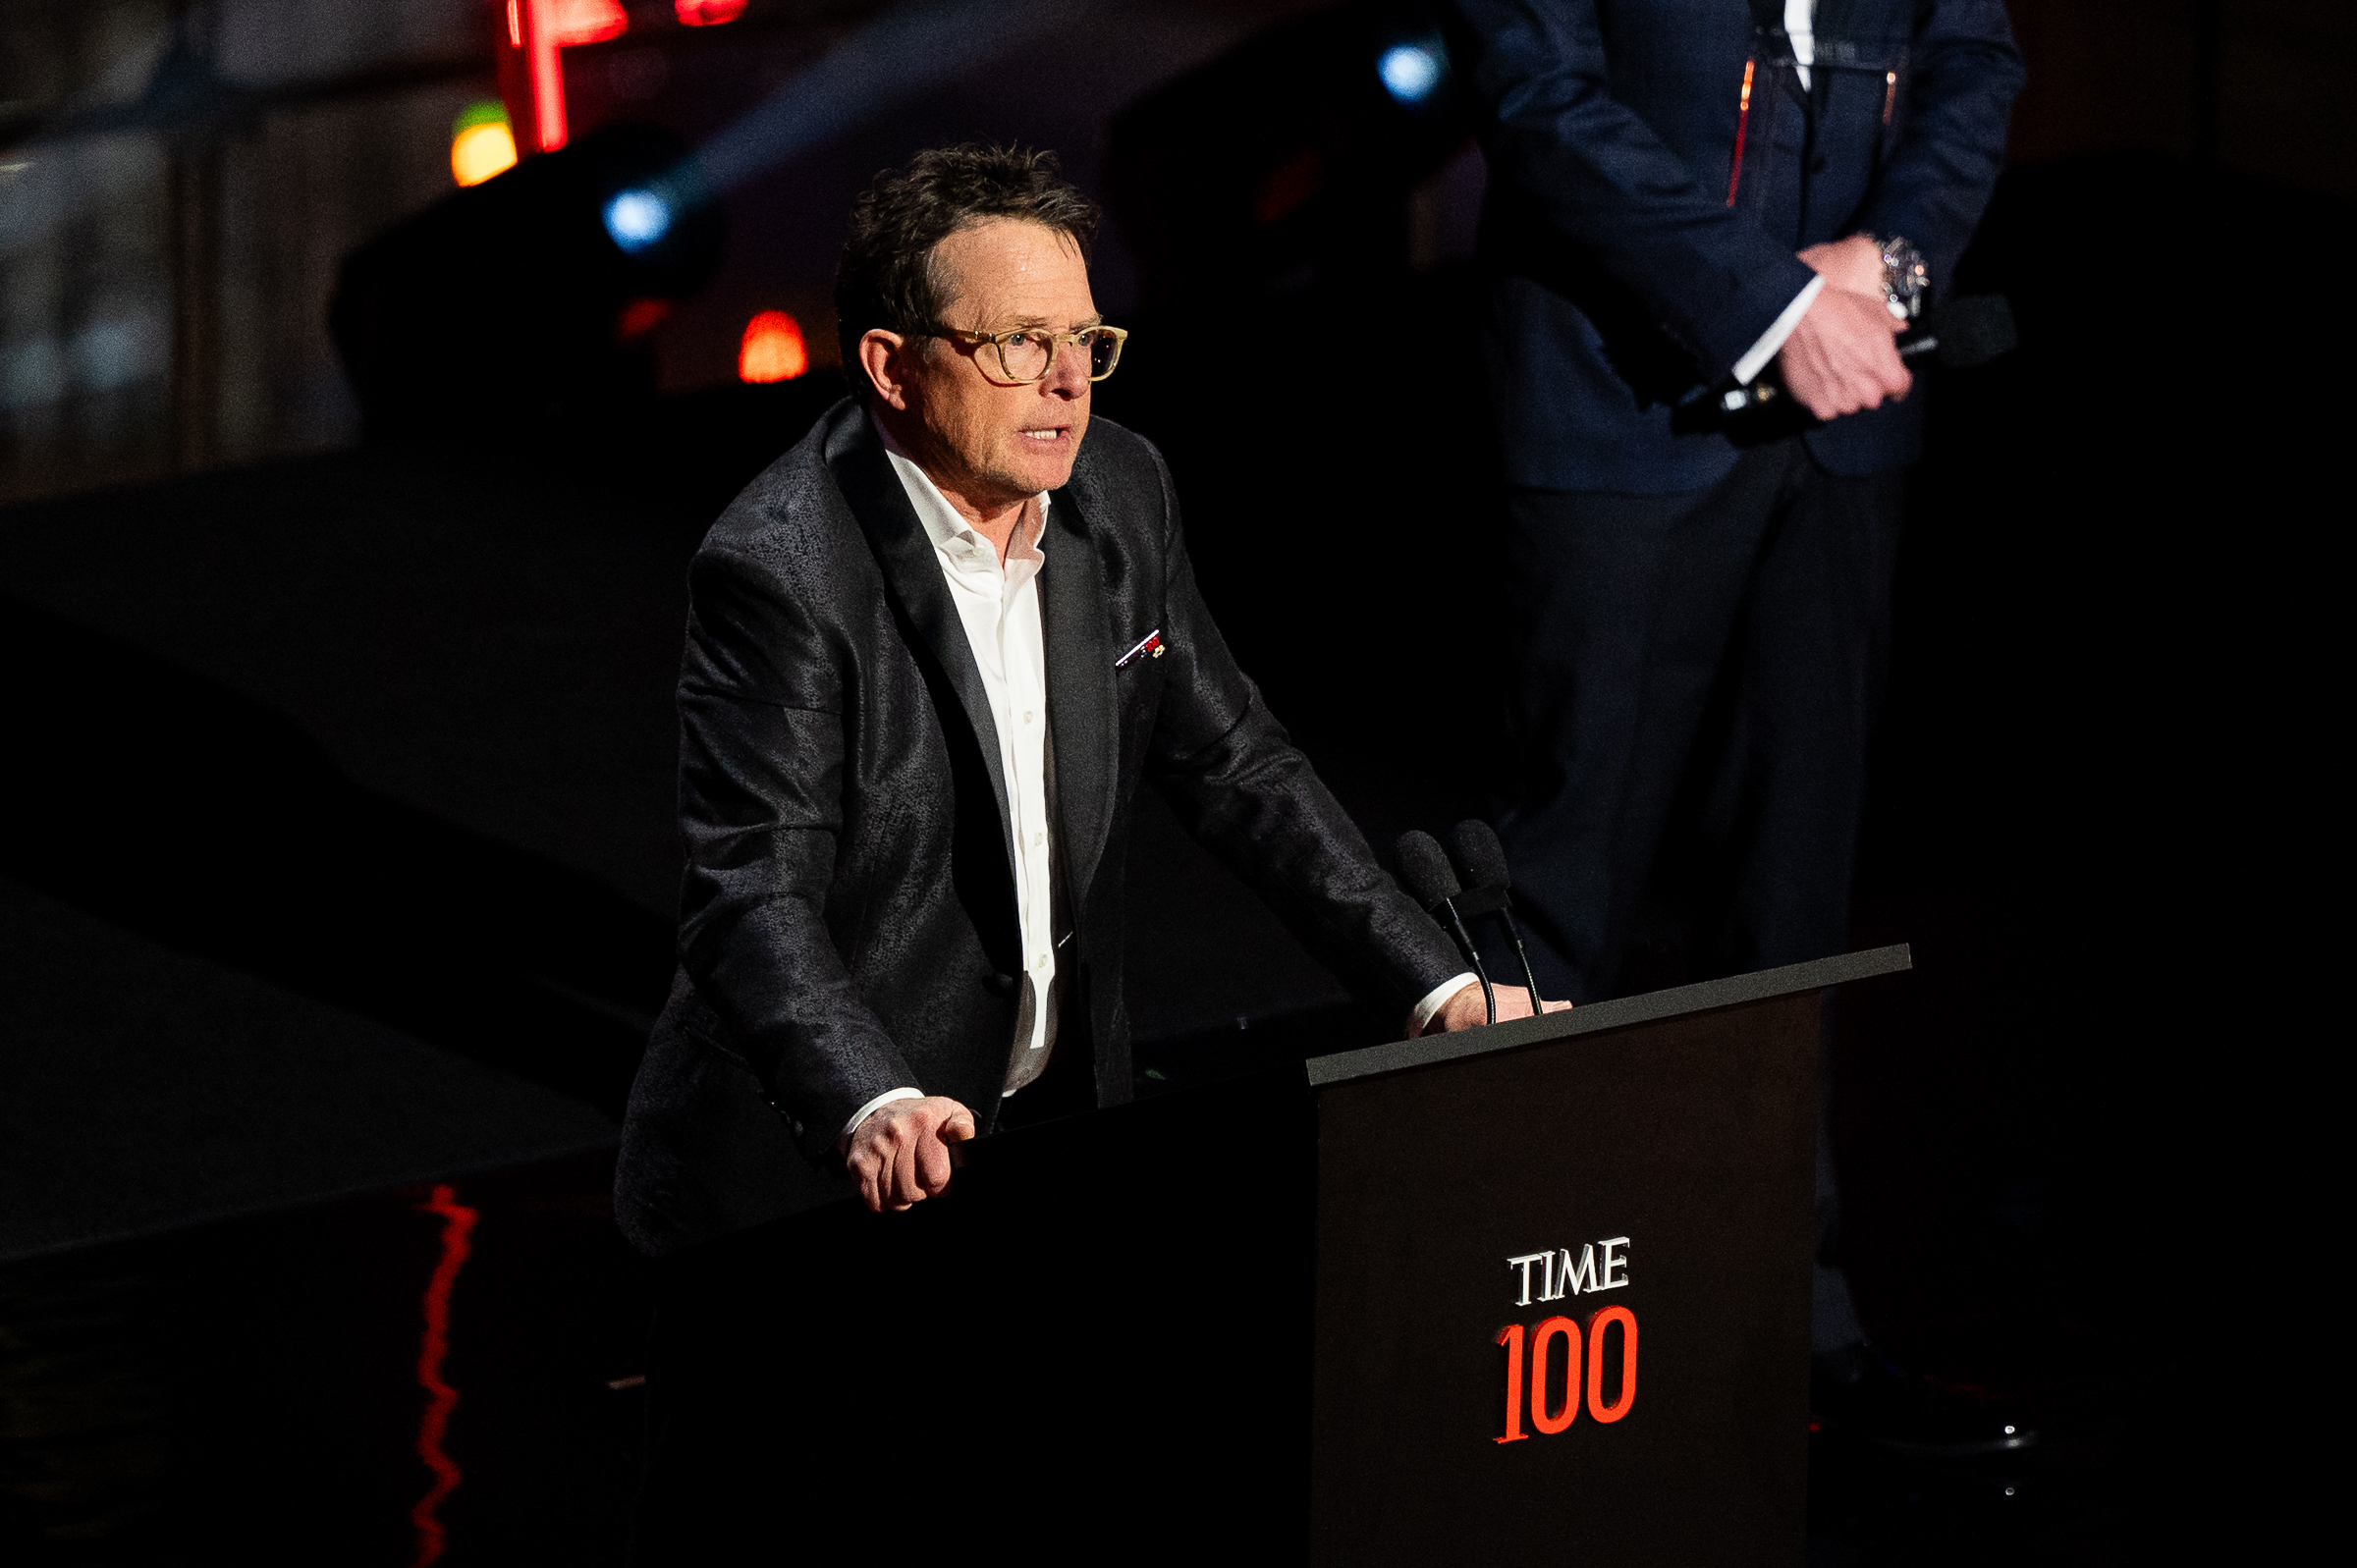 Michael J. Fox Accepts Time100 Impact Award With Moving Speech On Parkinson’s Experience